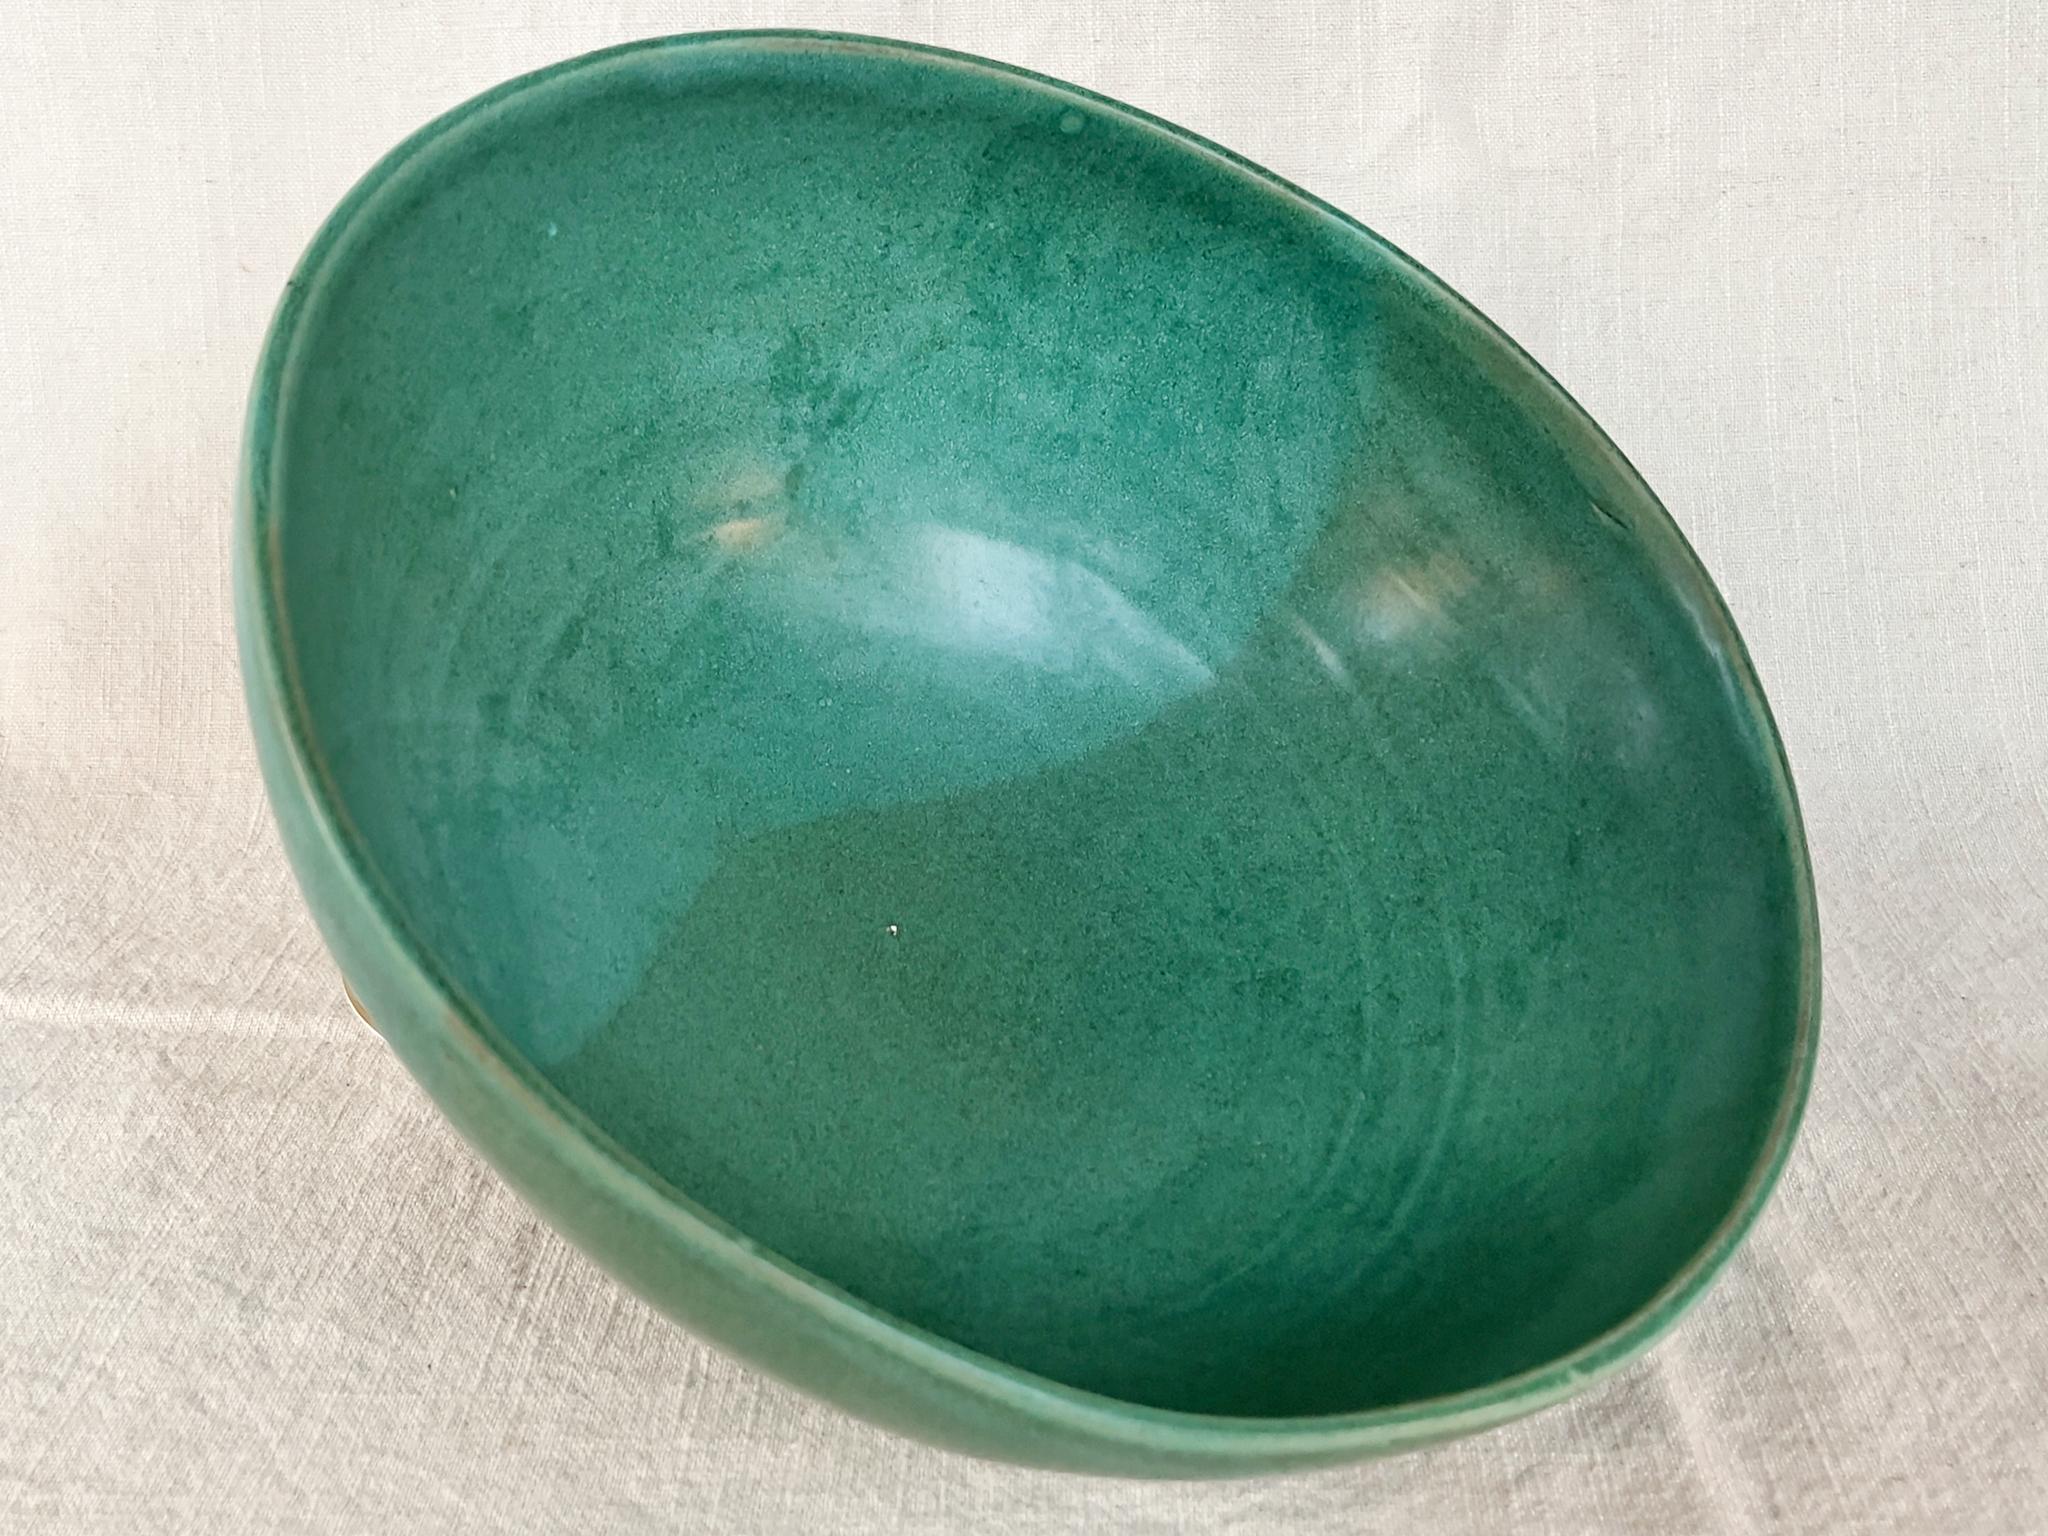 American Thom Lussier Ceramic Bowl #22, From the Oxidized Copper Collection For Sale